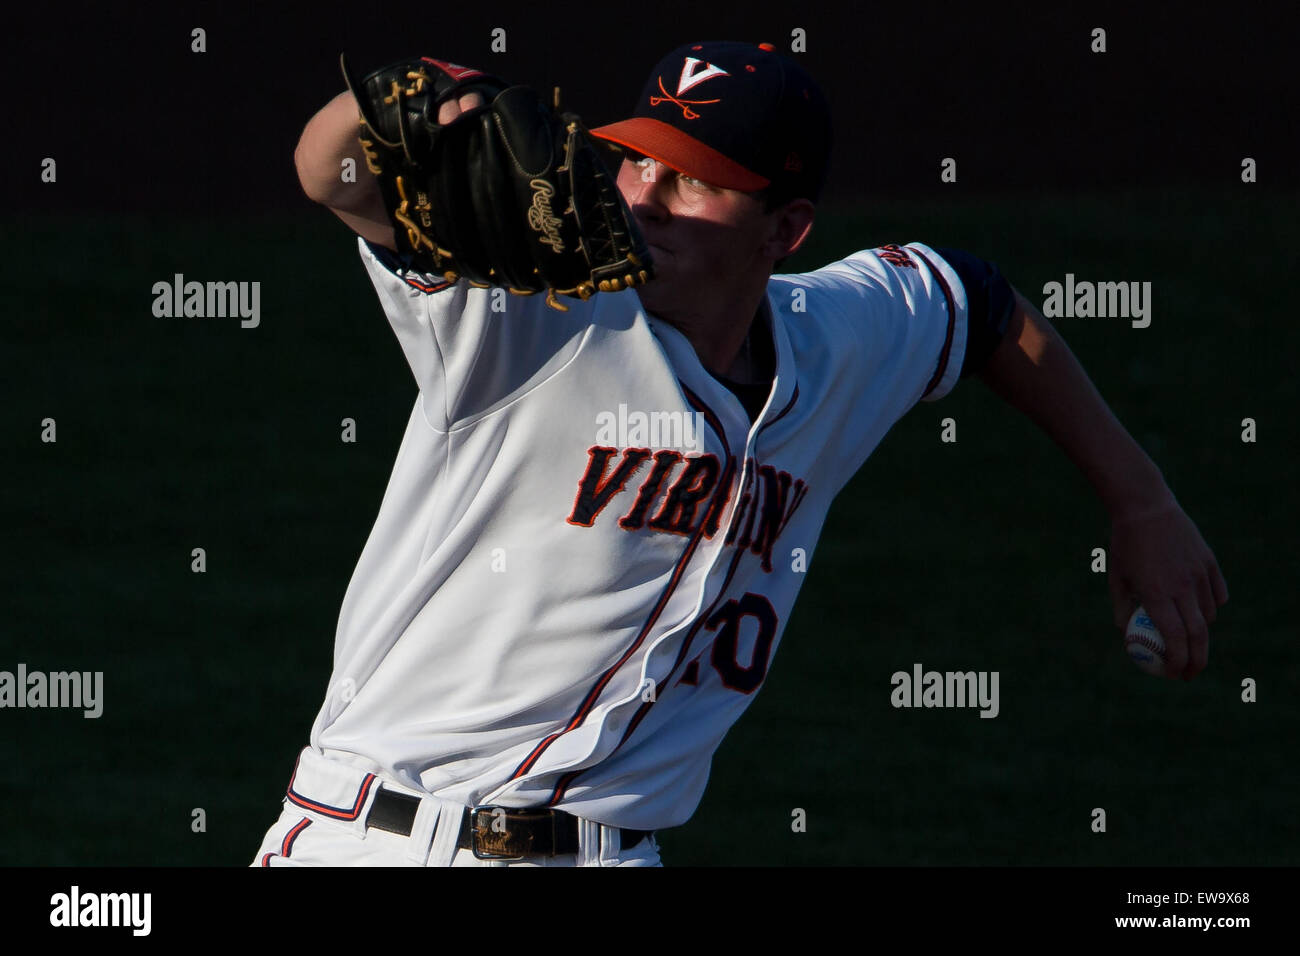 Omaha, NE, USA. 20th June, 2015. Virginia pitcher Brandon Waddell #20 in action during game 13 of the 2015 NCAA Men's College World Series between the Florida Gators and Virginia Cavaliers at TD Ameritrade Park in Omaha, NE.Nathan Olsen/Cal Sport Media. Credit:  csm/Alamy Live News Stock Photo